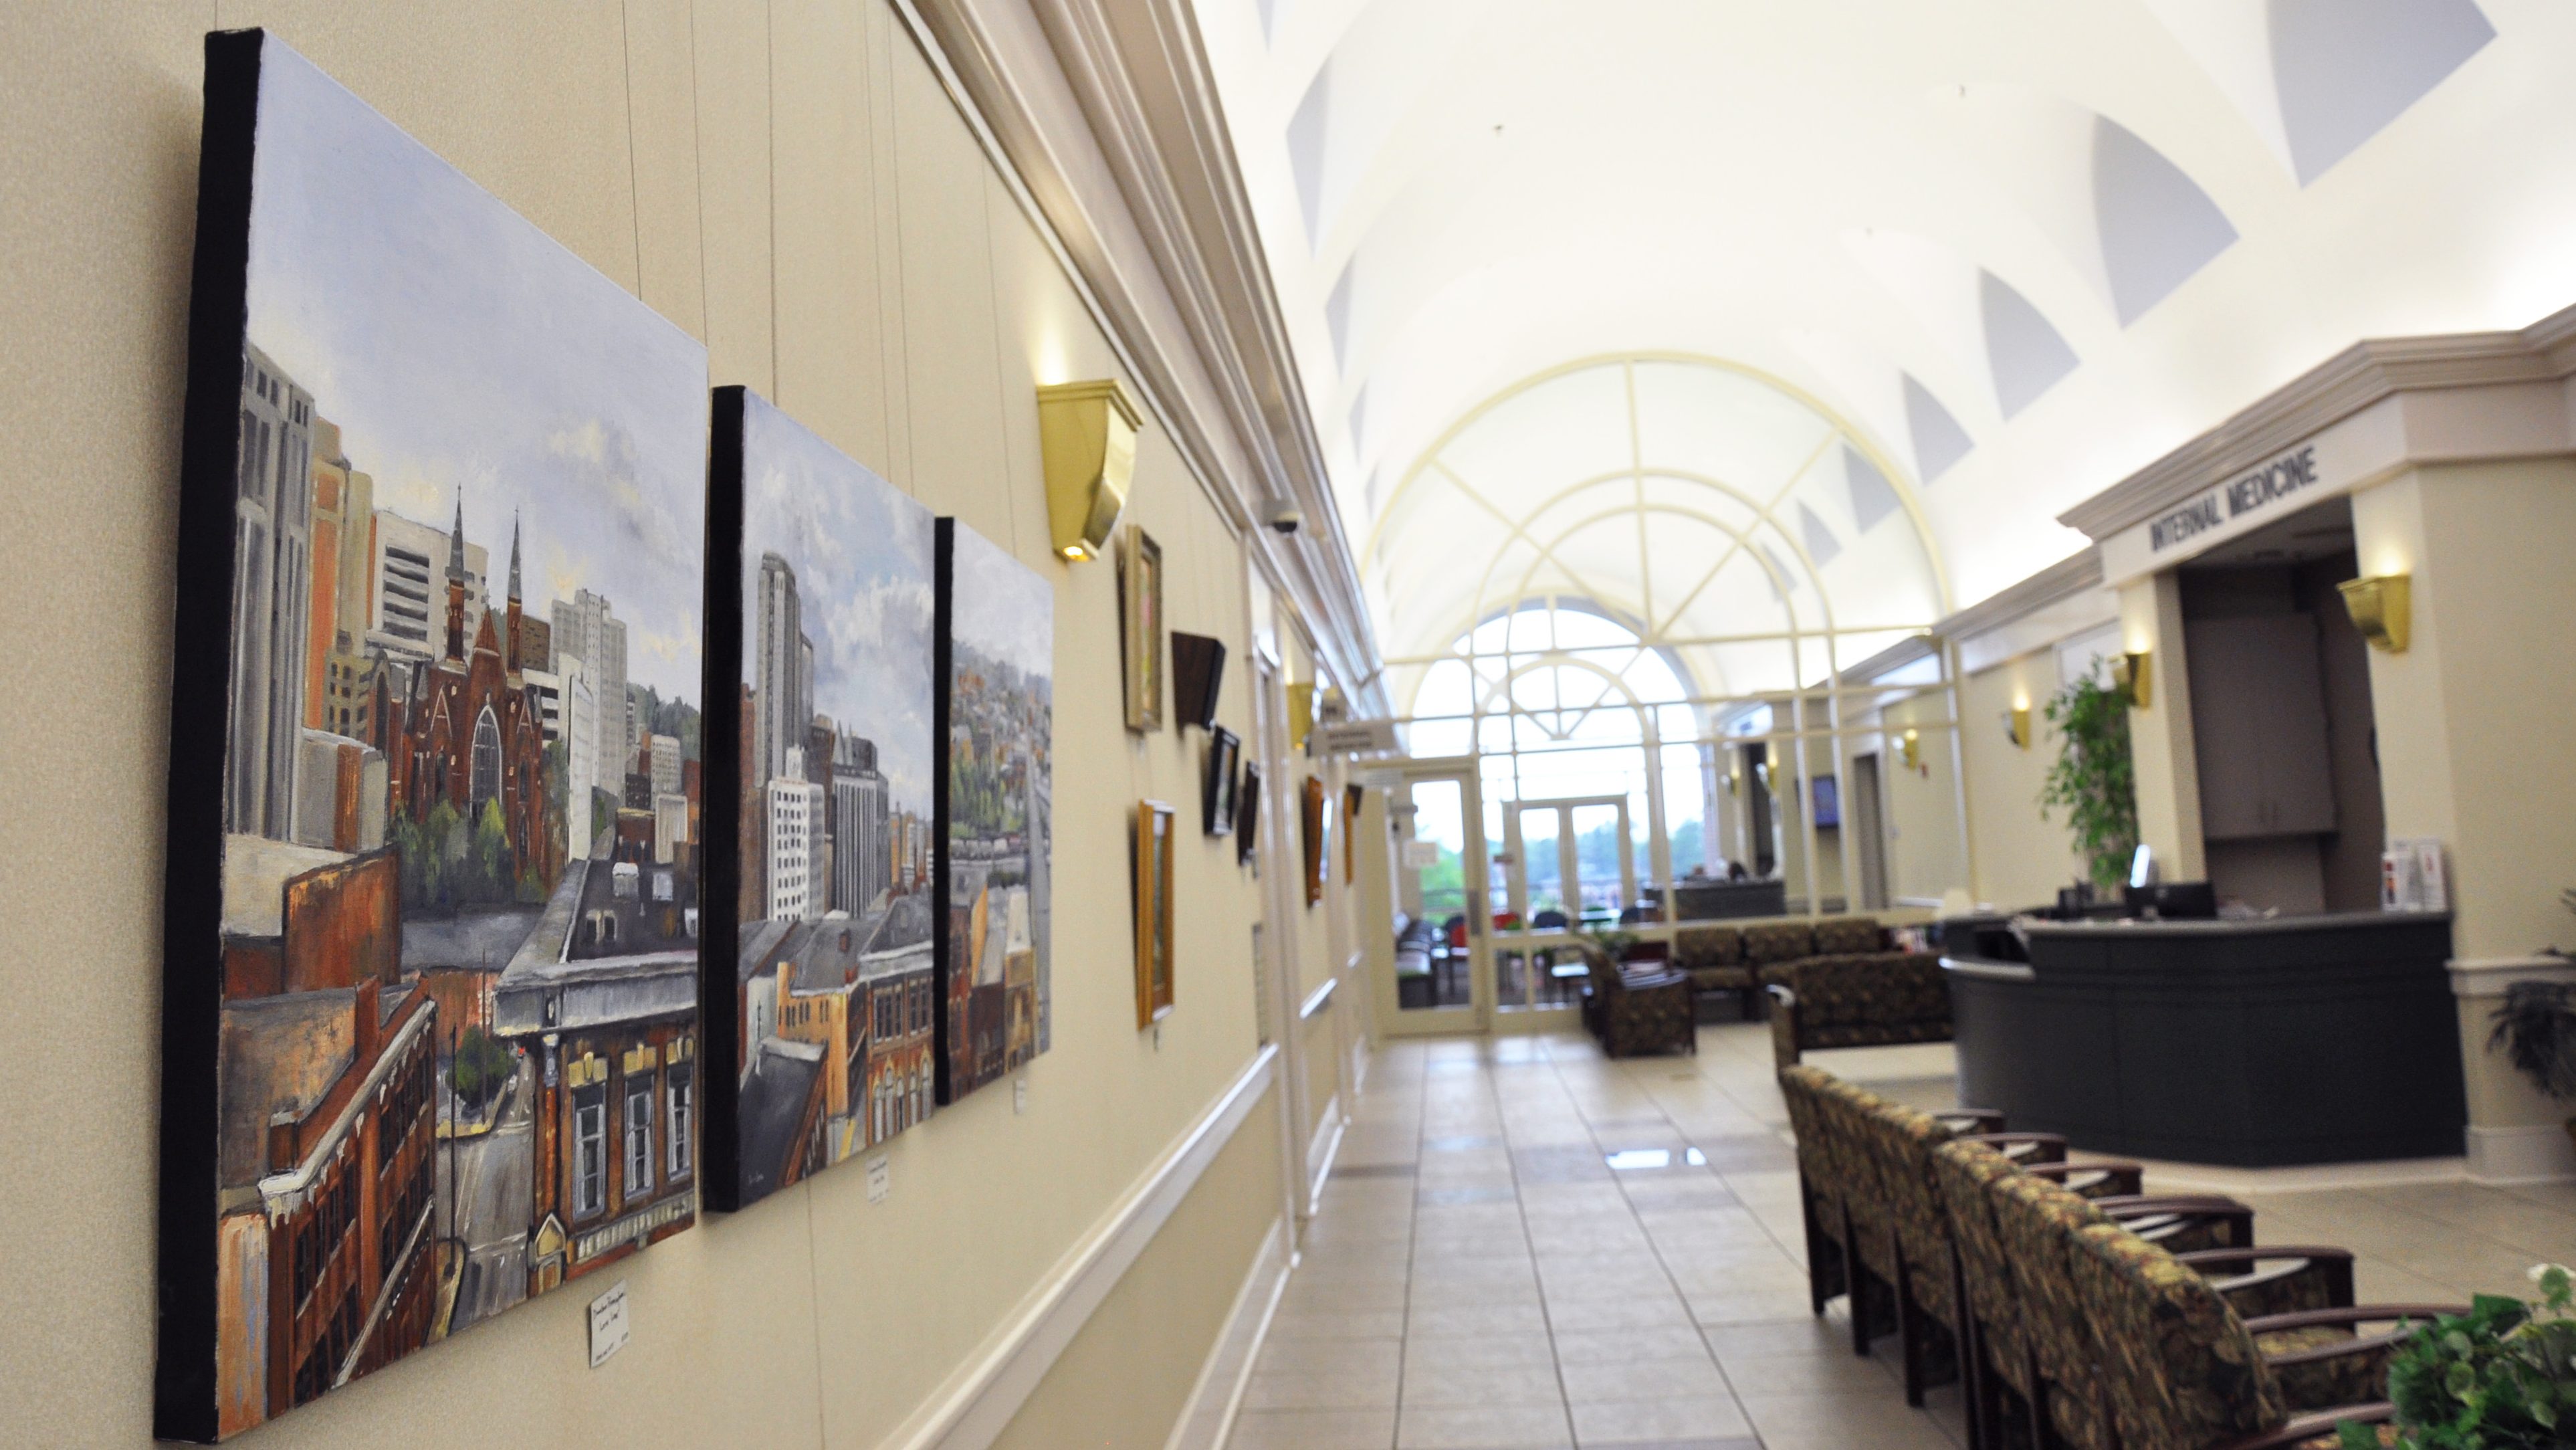 The Wellness Walls for Art, a new program designed to fill the waiting areas at the University Medical Center with bright and vibrant paintings